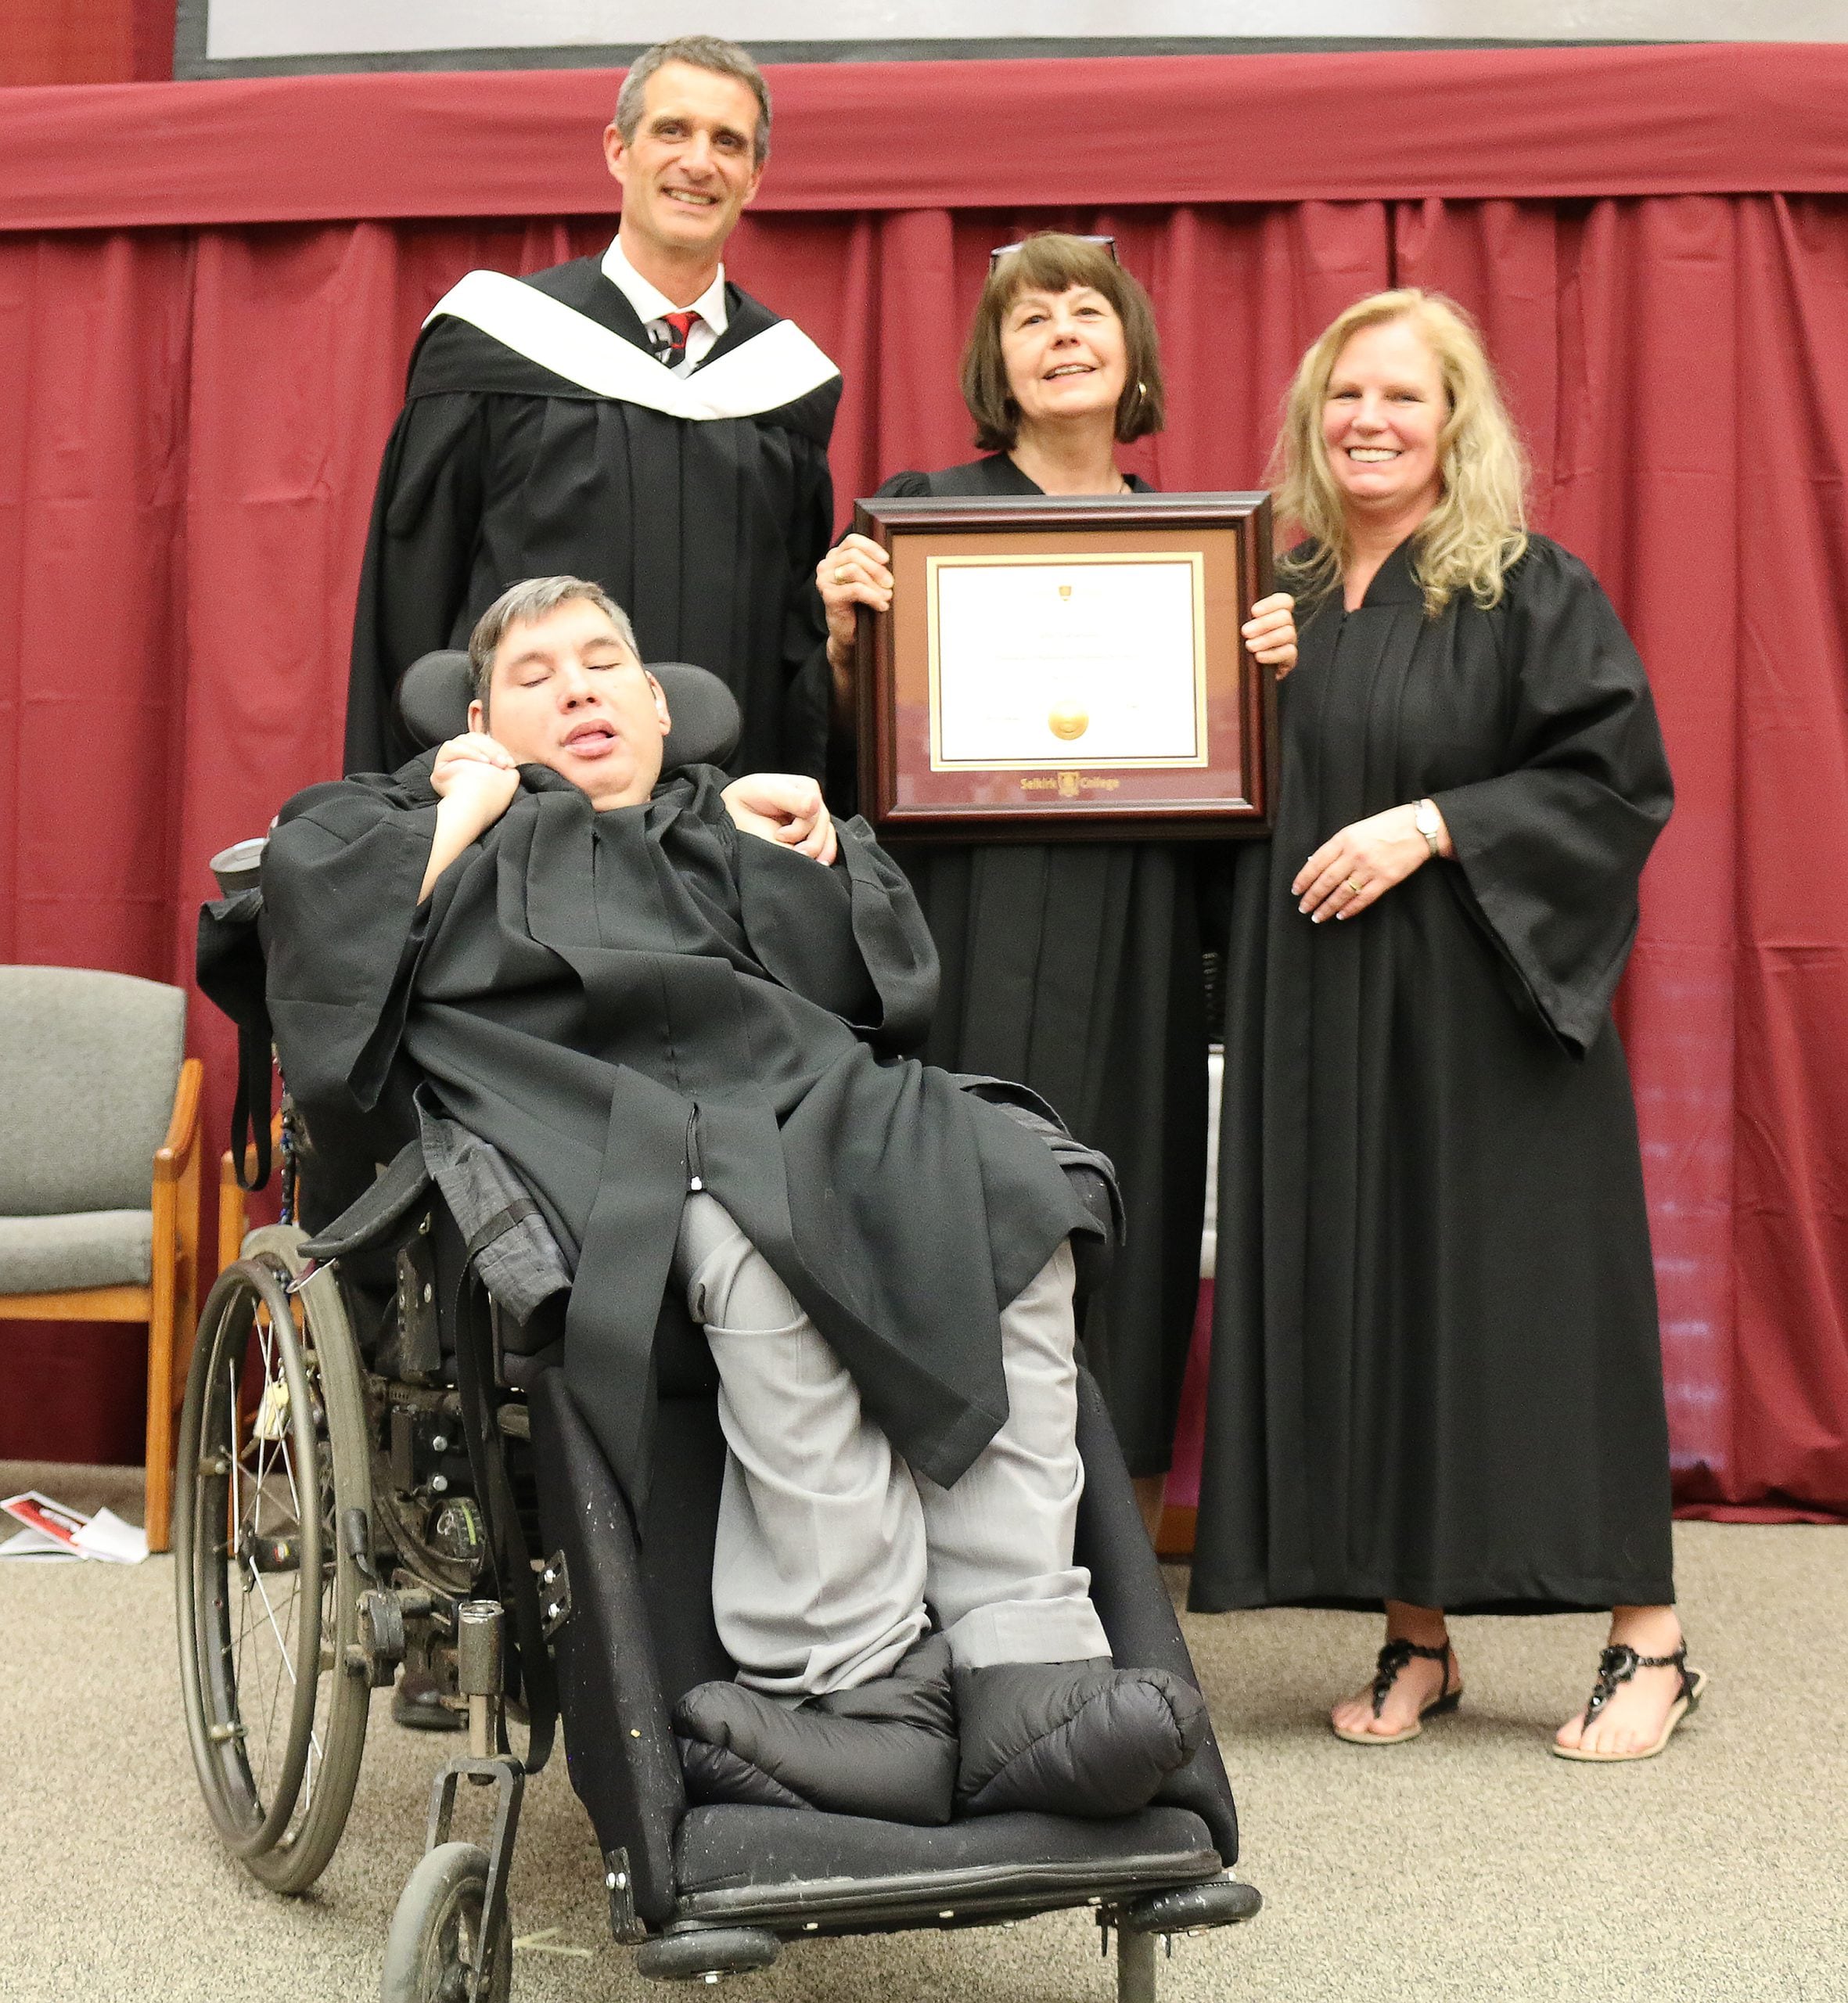 Selkirk College Awards Honourary Diploma to Cathy Lafortune